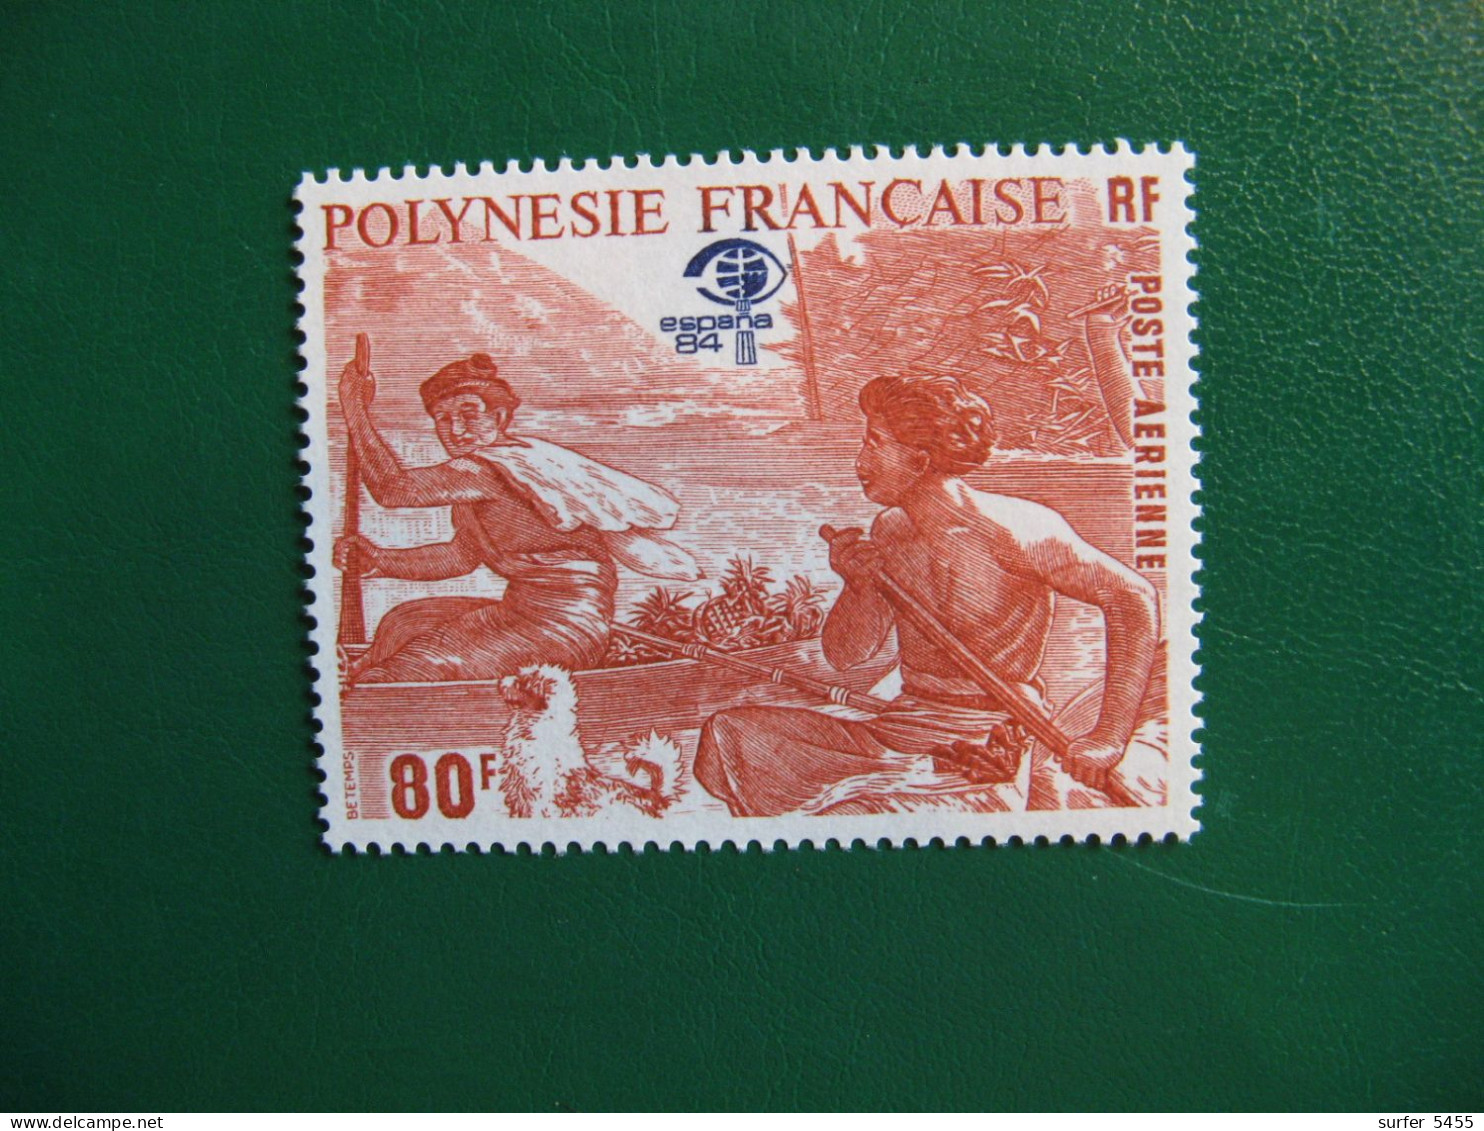 P0LYNESIE PO AERIENNE N° 182 TIMBRE NEUF ** LUXE - MNH - SERIE COMPLETE - FACIALE 0,67 EURO - Nuevos